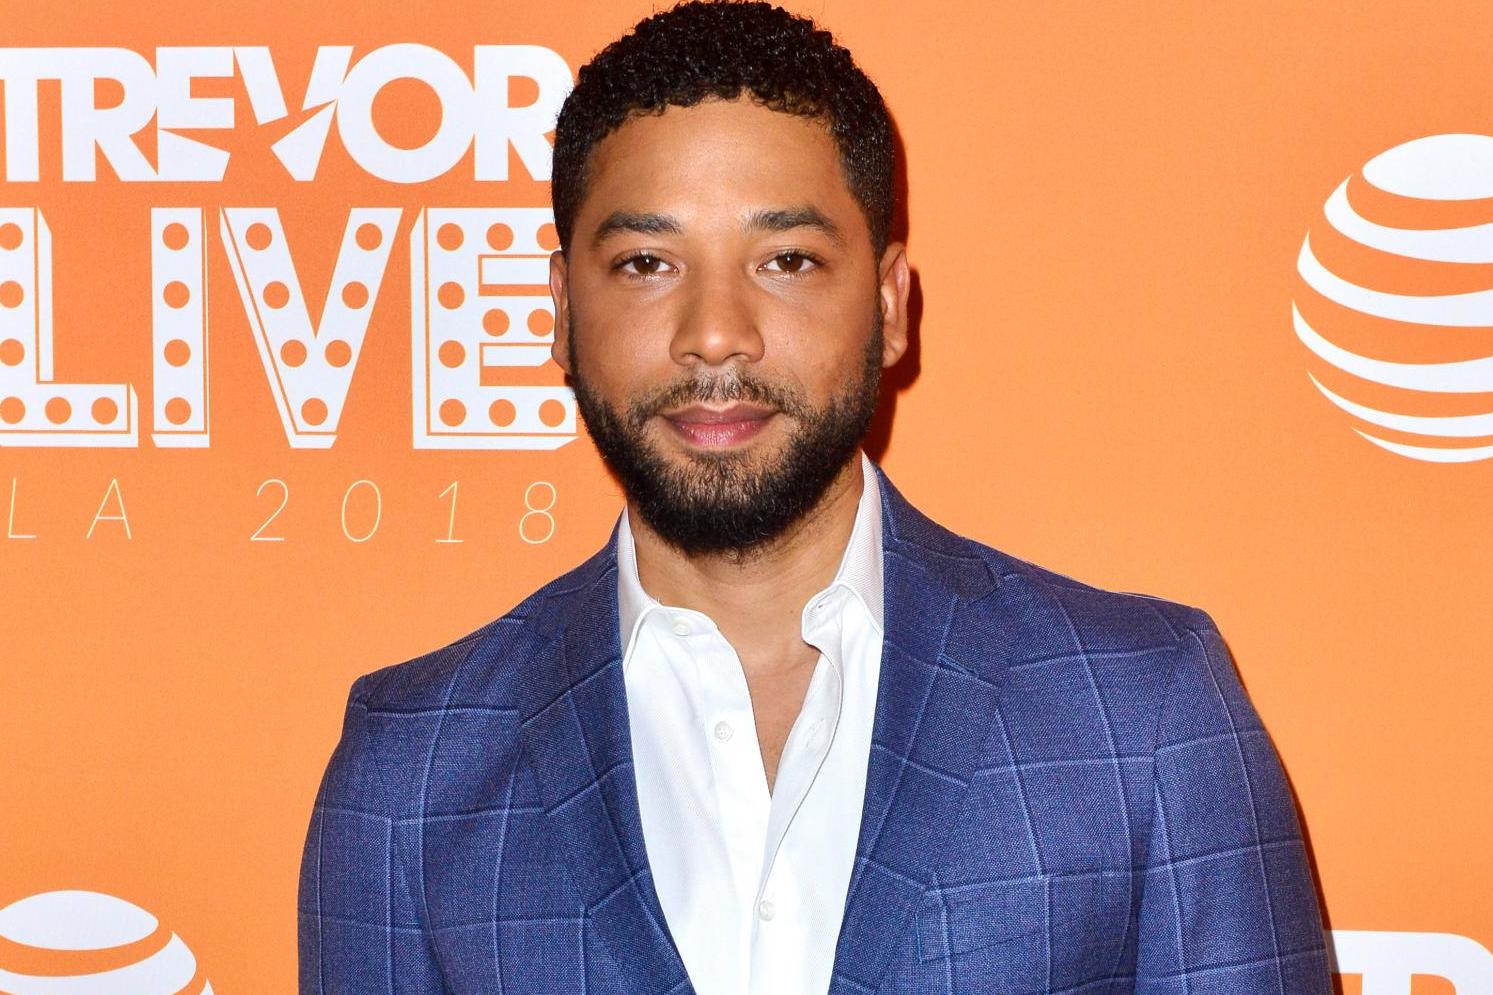 Jussie Smollett attends the Trevor Project's TrevorLIVE LA 2018 at The Beverly Hilton Hotel on 3 December, 2018 in Beverly Hills, California.